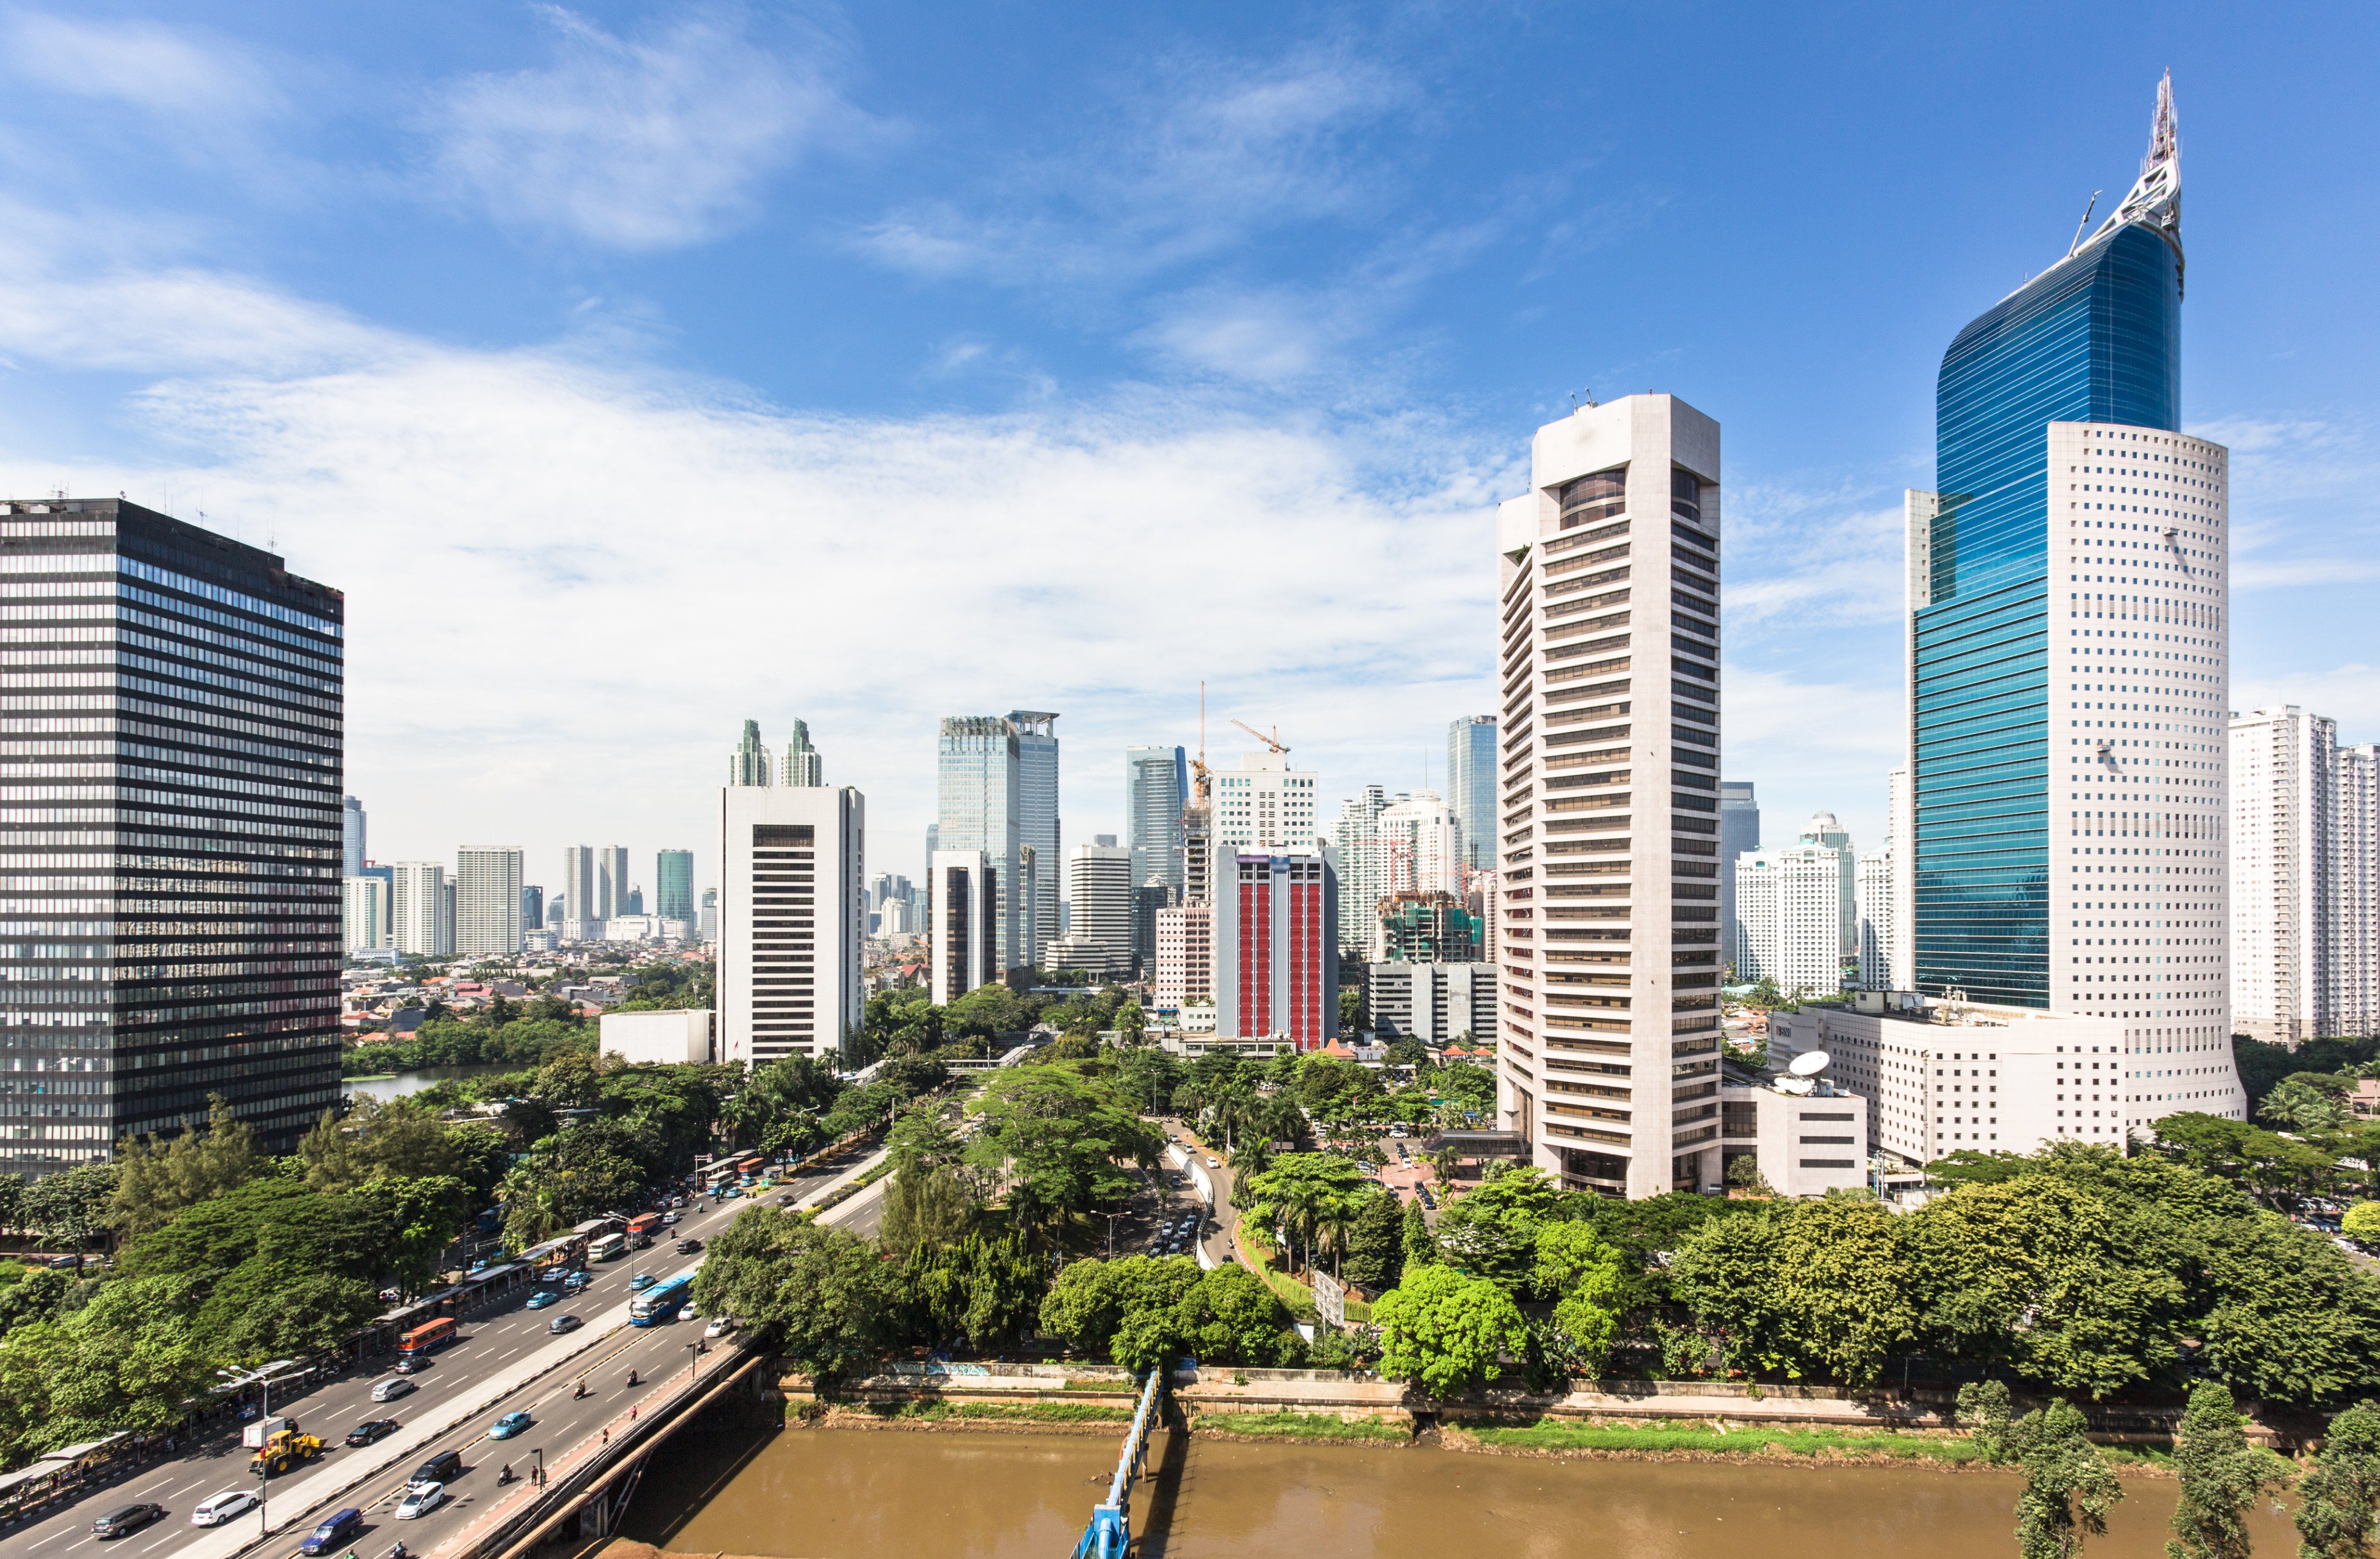 The business district of Jakarta, Indonesia, along Jalan Sudirman, one of the city’s main avenues. Photo: Shutterstock